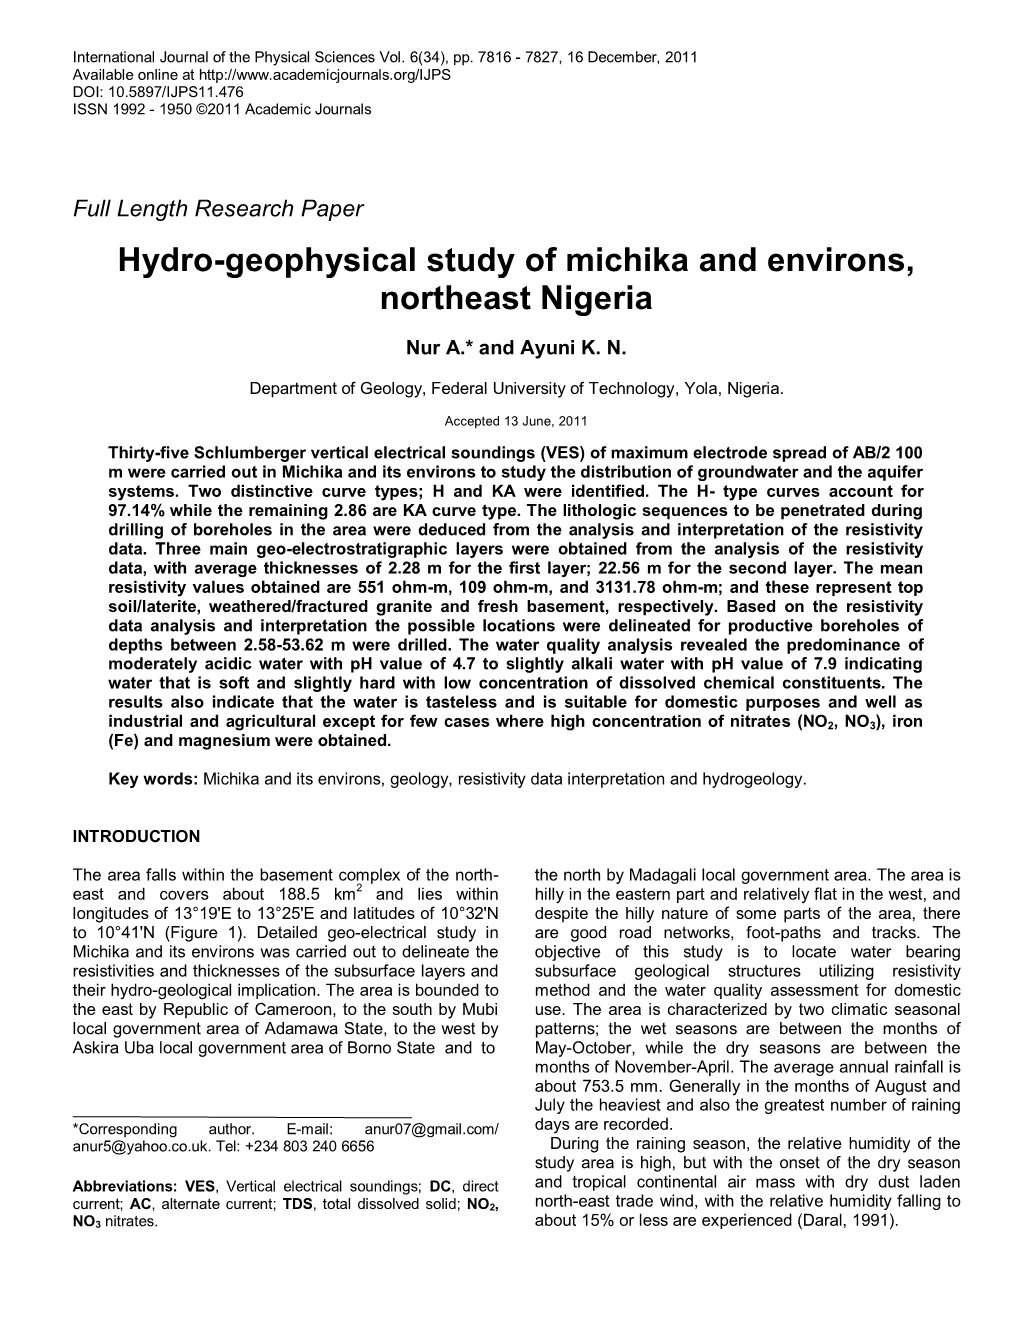 Hydro-Geophysical Study of Michika and Environs, Northeast Nigeria